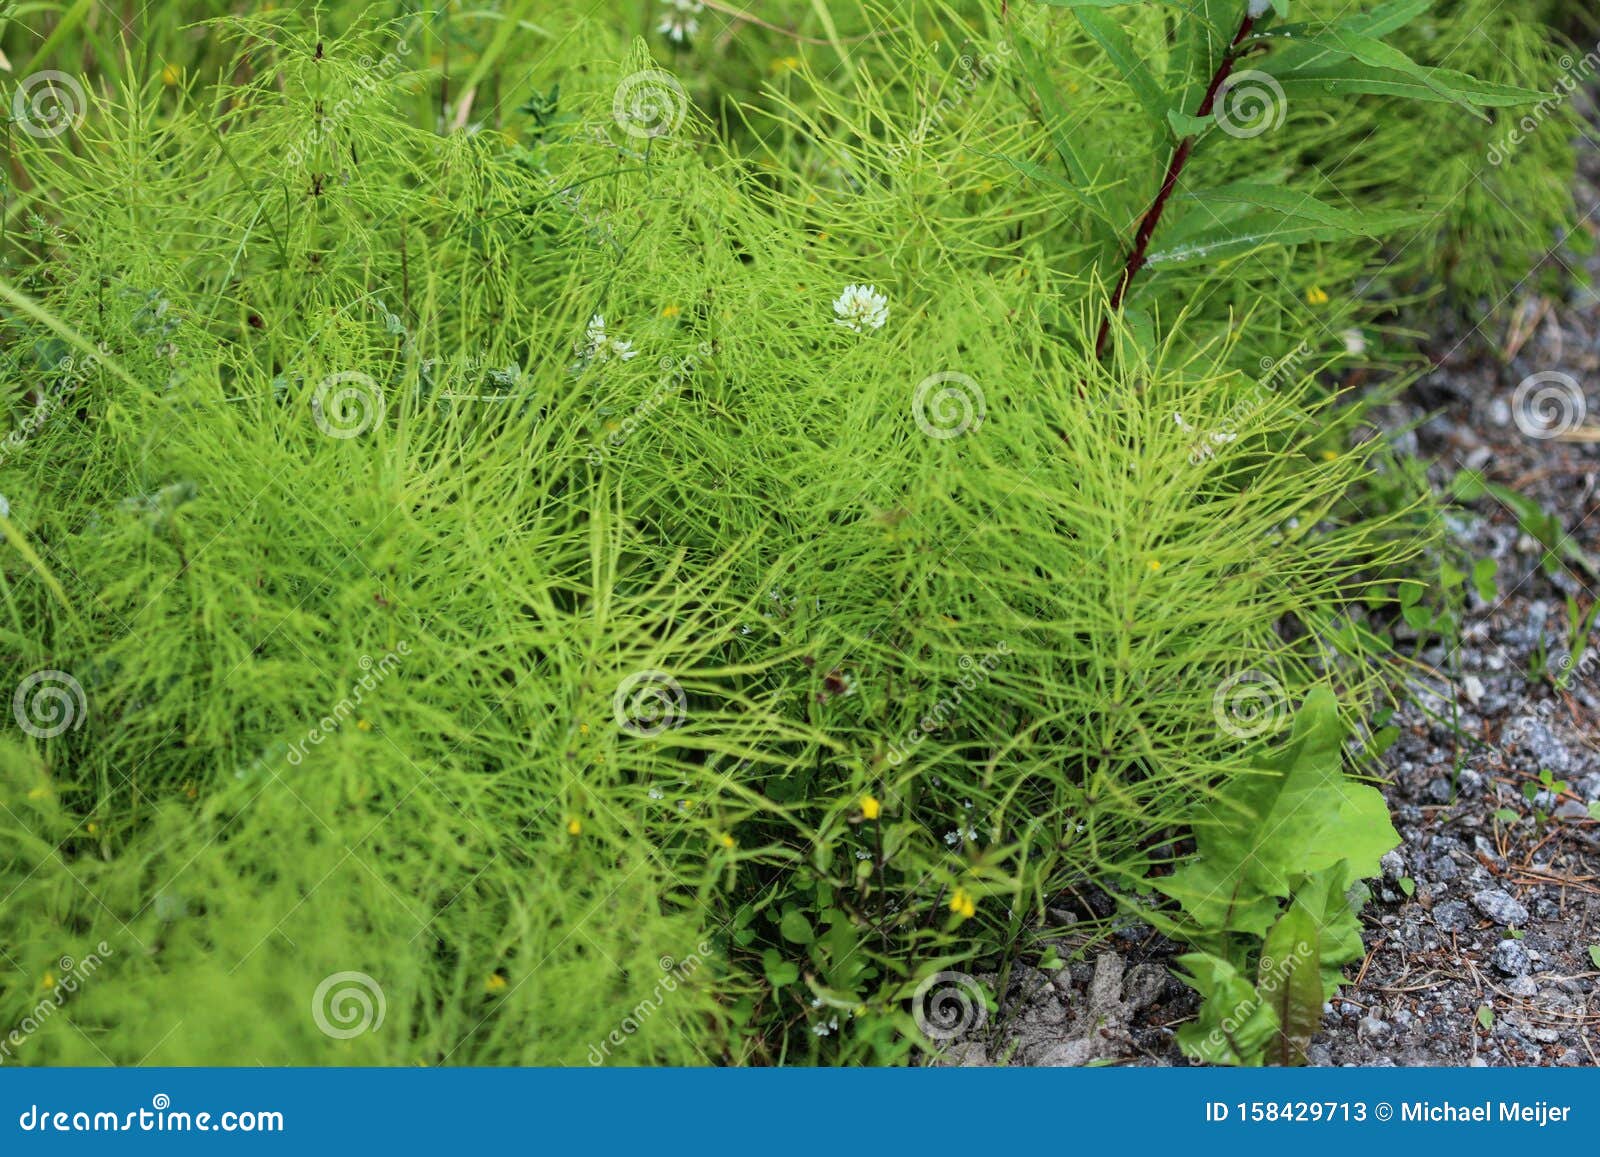 equisetum sylvaticum, the wood horsetail, growing in the forest